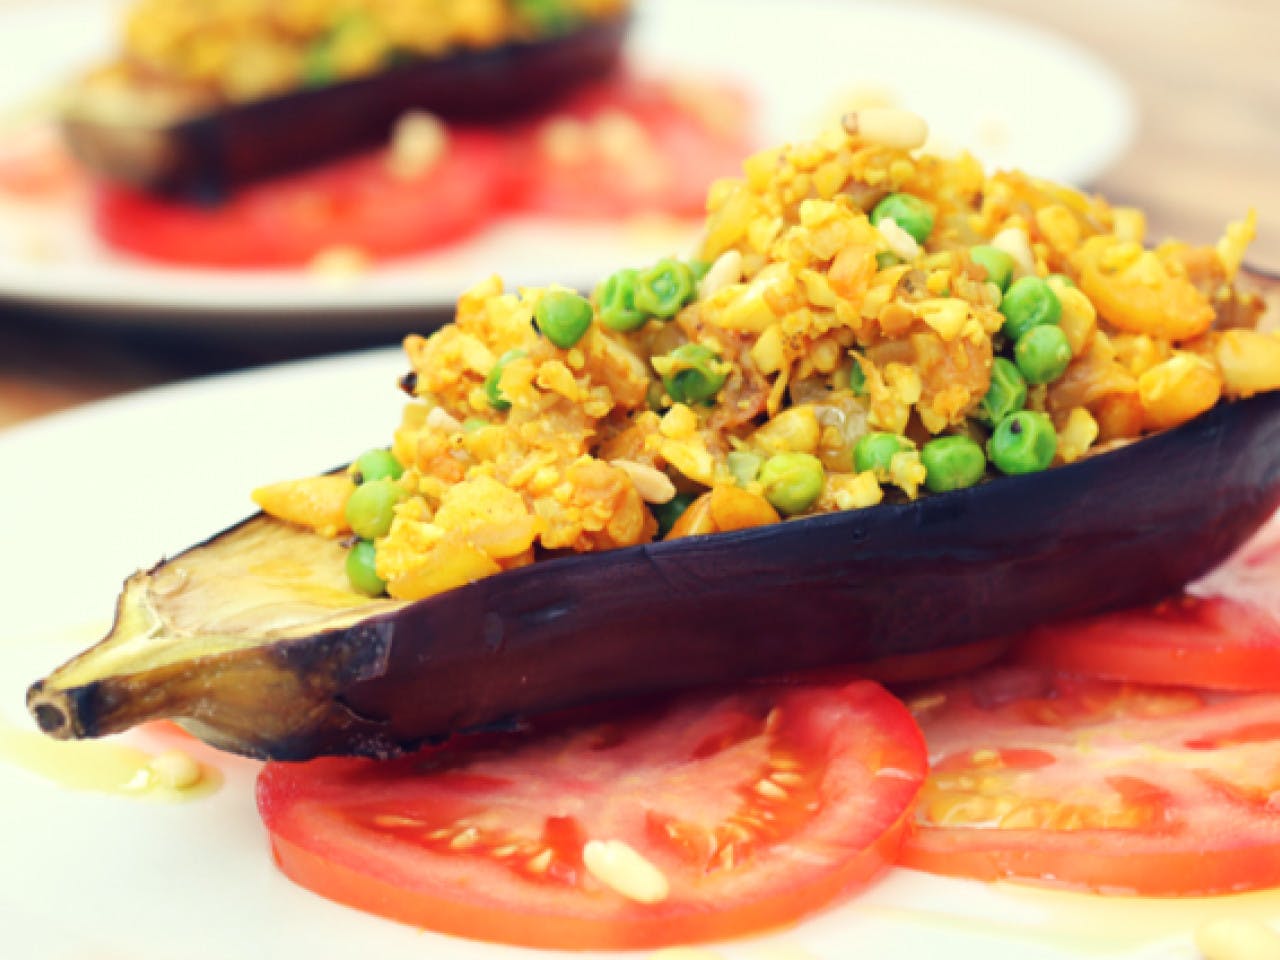 Stuffed aubergine with couscous and peas